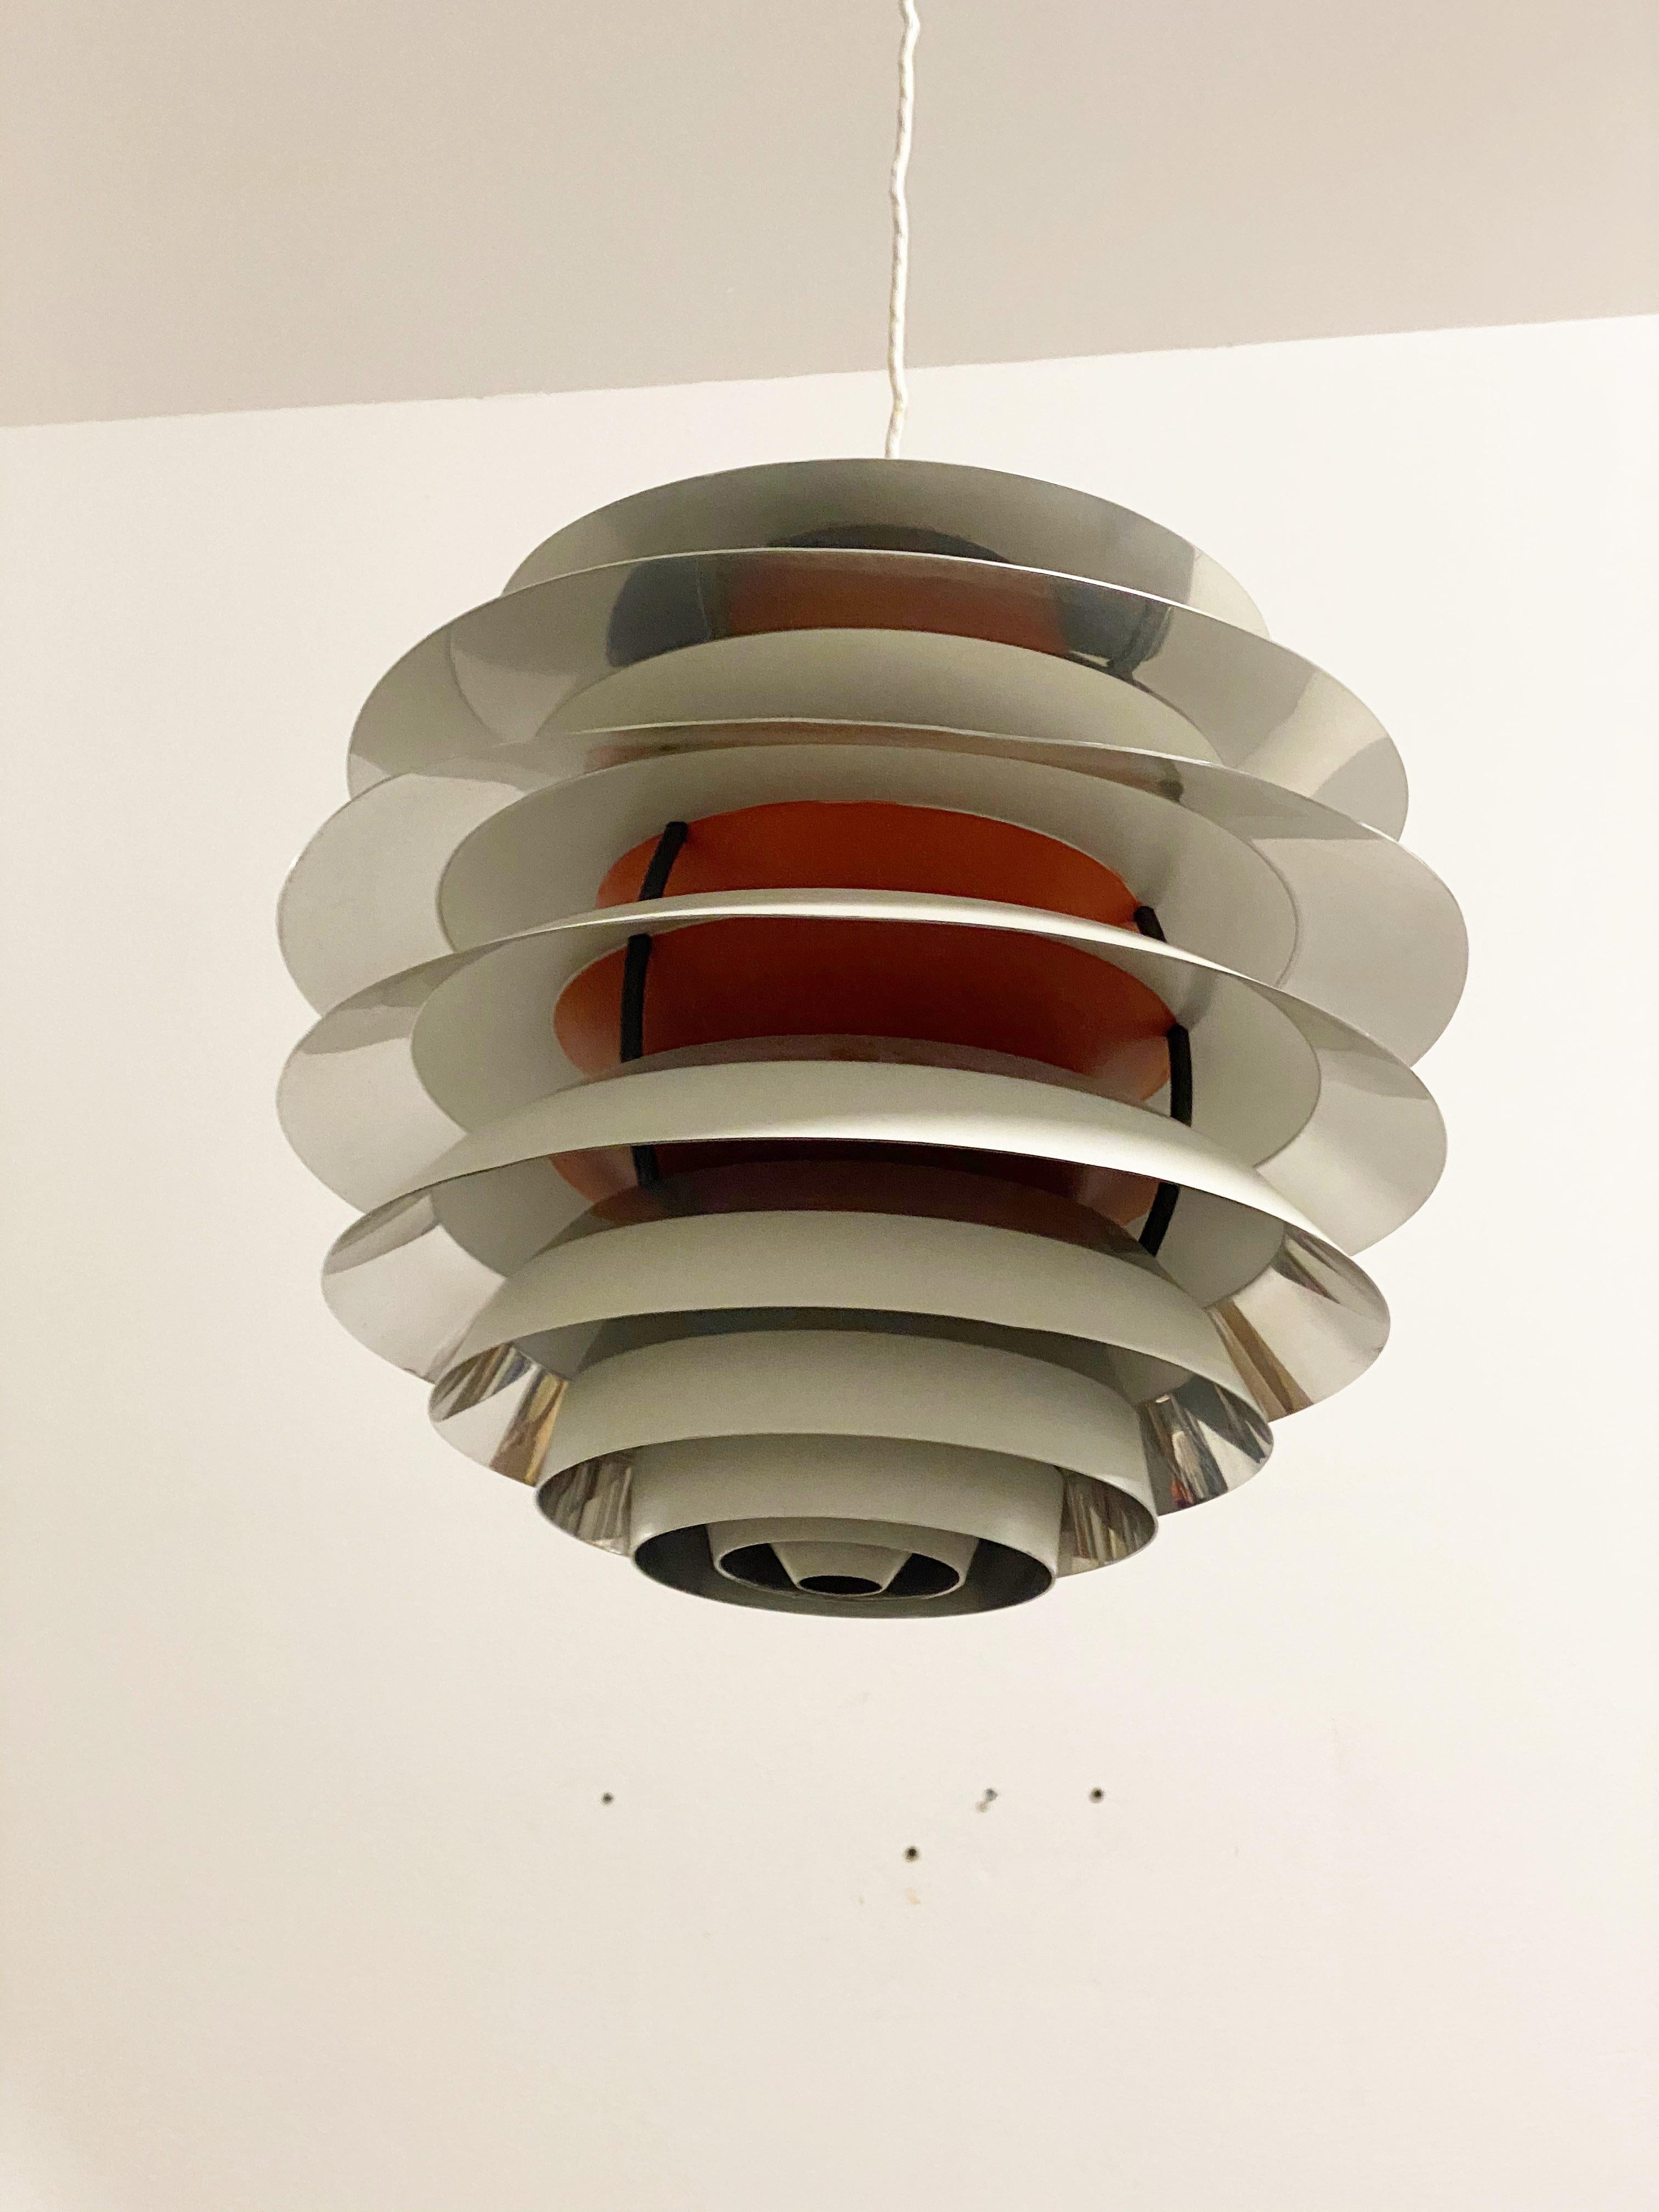 Aluminum lacquered white/orange and chromed parts with black lacquered brass fittings.
PH kontrast or snowball designed by Poul Henningsen in 1958-1962 and manufactured by Louis Poulsen. 

Literature: Light Years Ahead: The Story of the PH Lamp